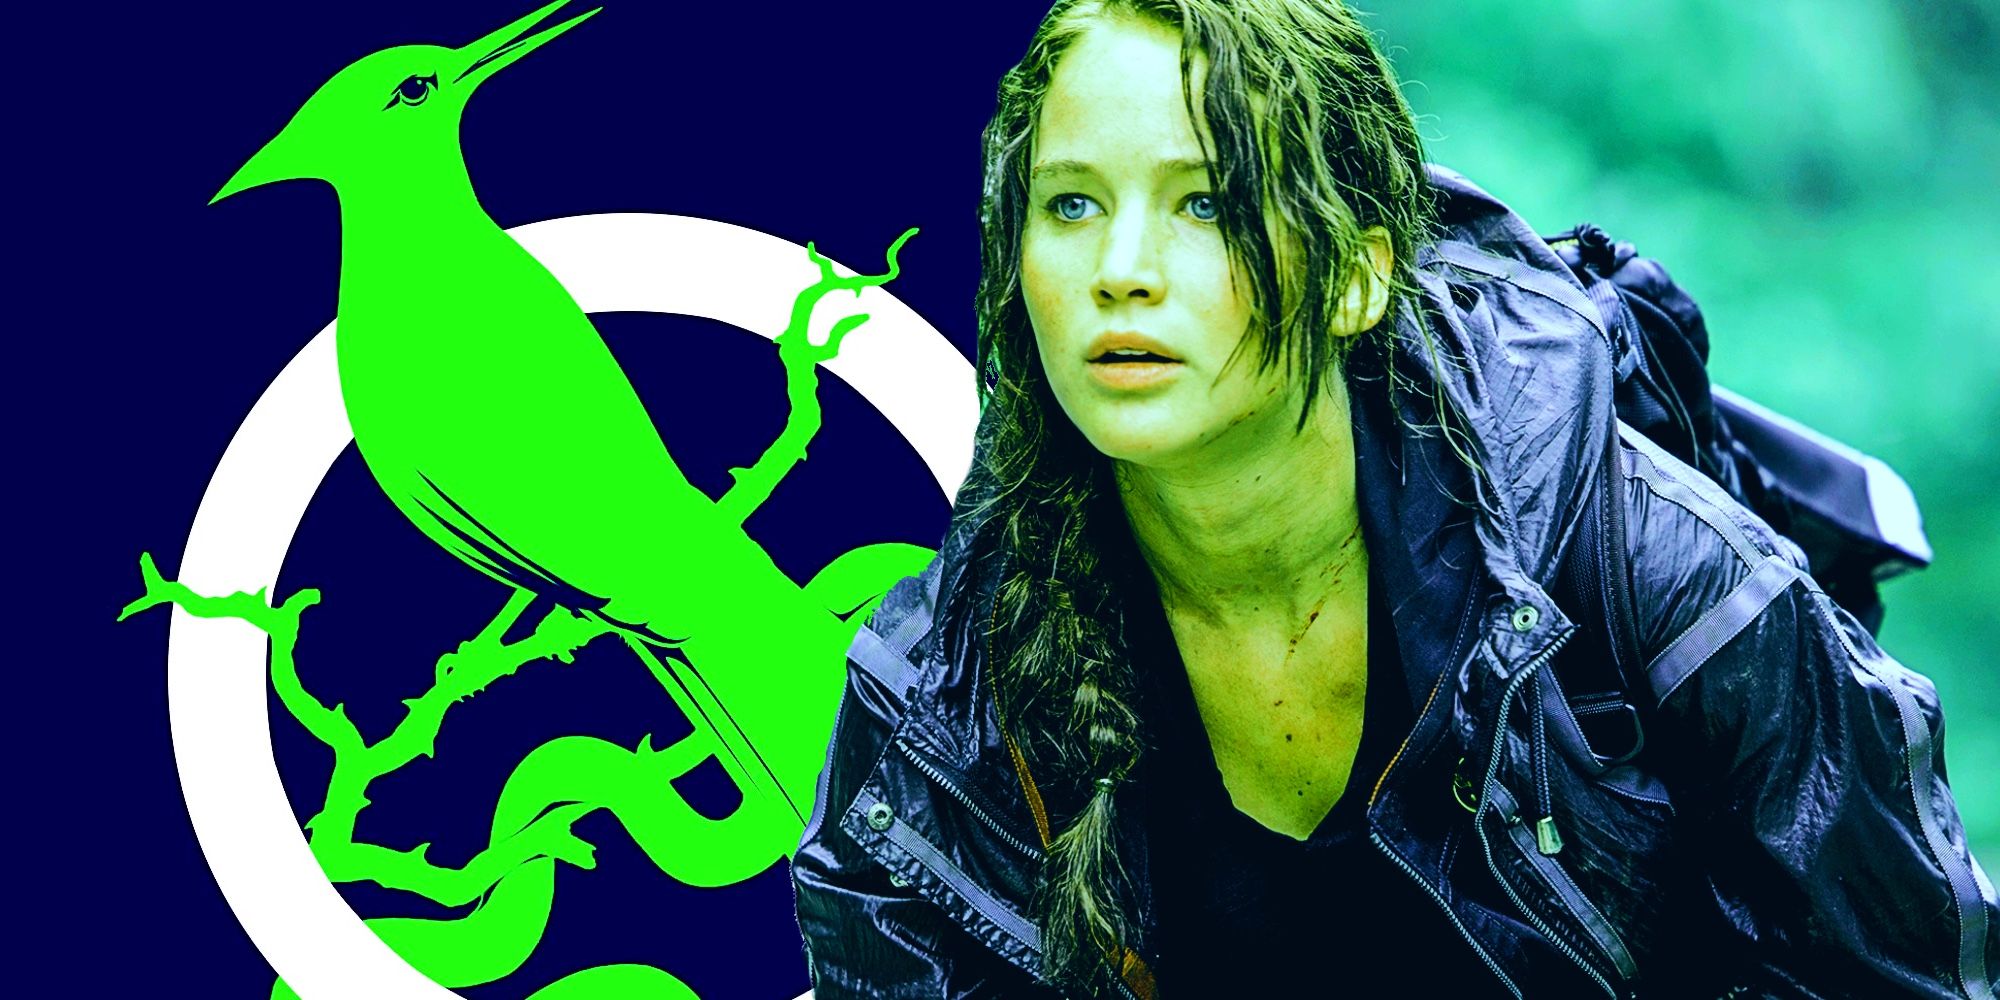 jennifer lawrence as katniss everdeen in the hunger games and the ballad of songbirds and snakes book cover